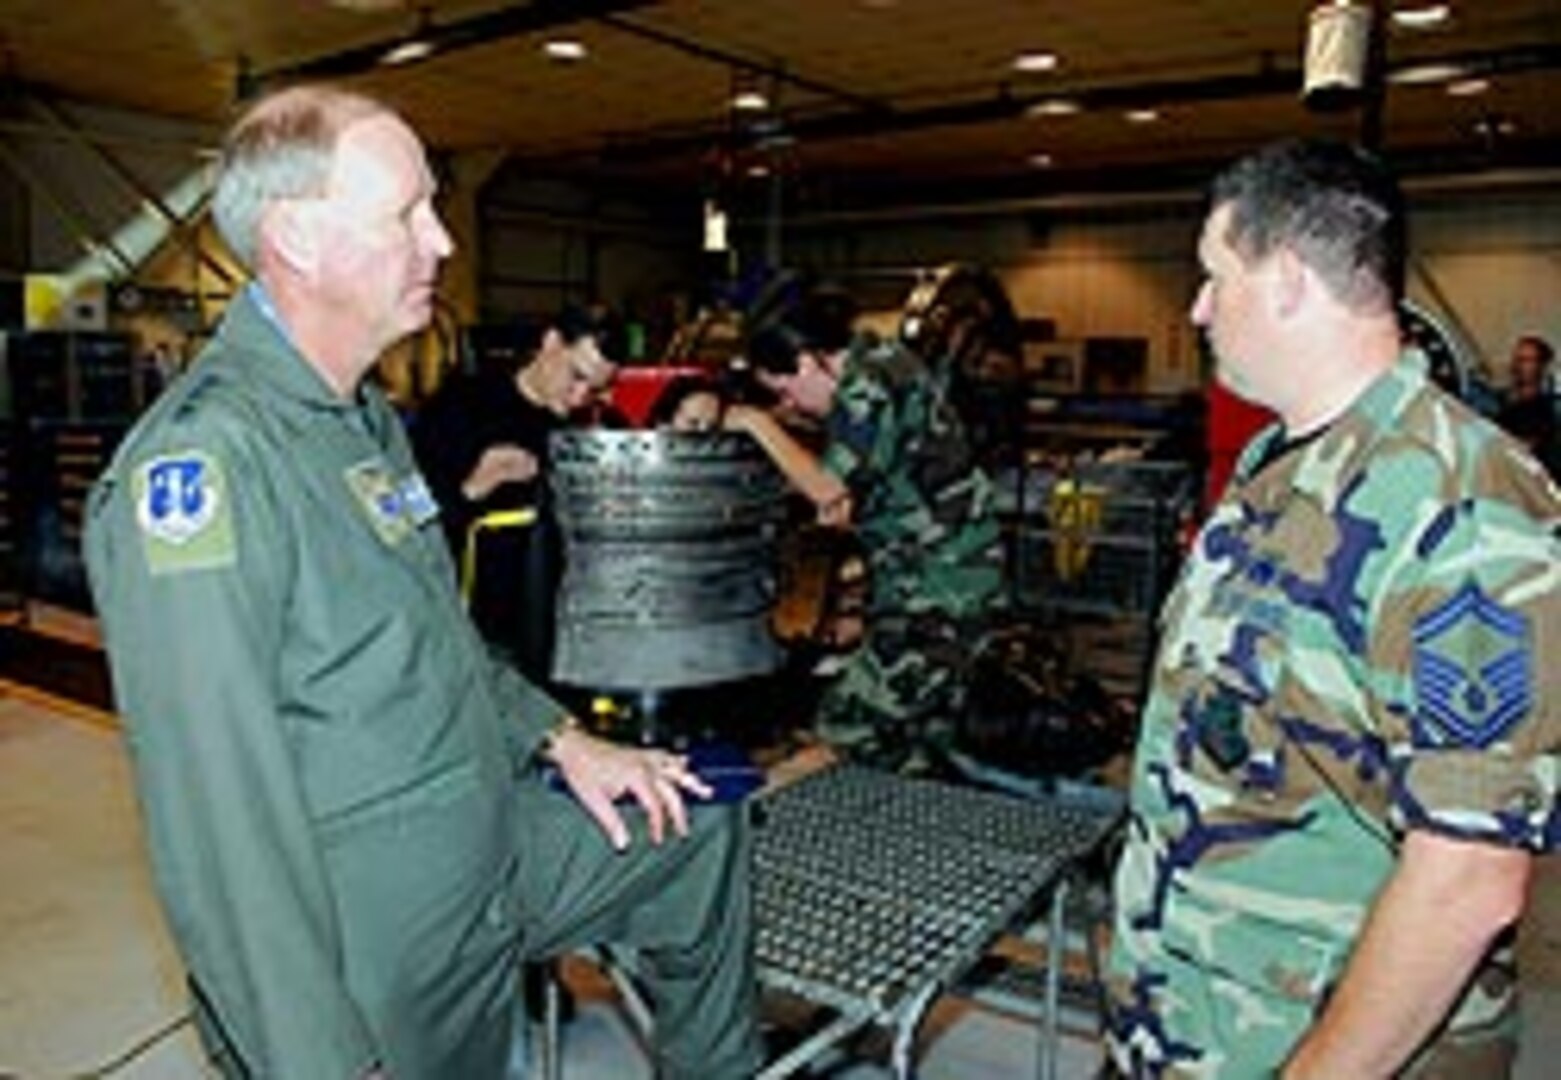 Lt. Gen. Craig R. McKinley, director of the Air National Guard, discusses F-16 Fighting Falcon engine maintenance and repair operations with Senior Master Sgt. Troy Davis, noncommissioned officer in charge of the propulsion branch, while visiting the 181st Fighter Wing, Terre Haute, Ind., on May 18.